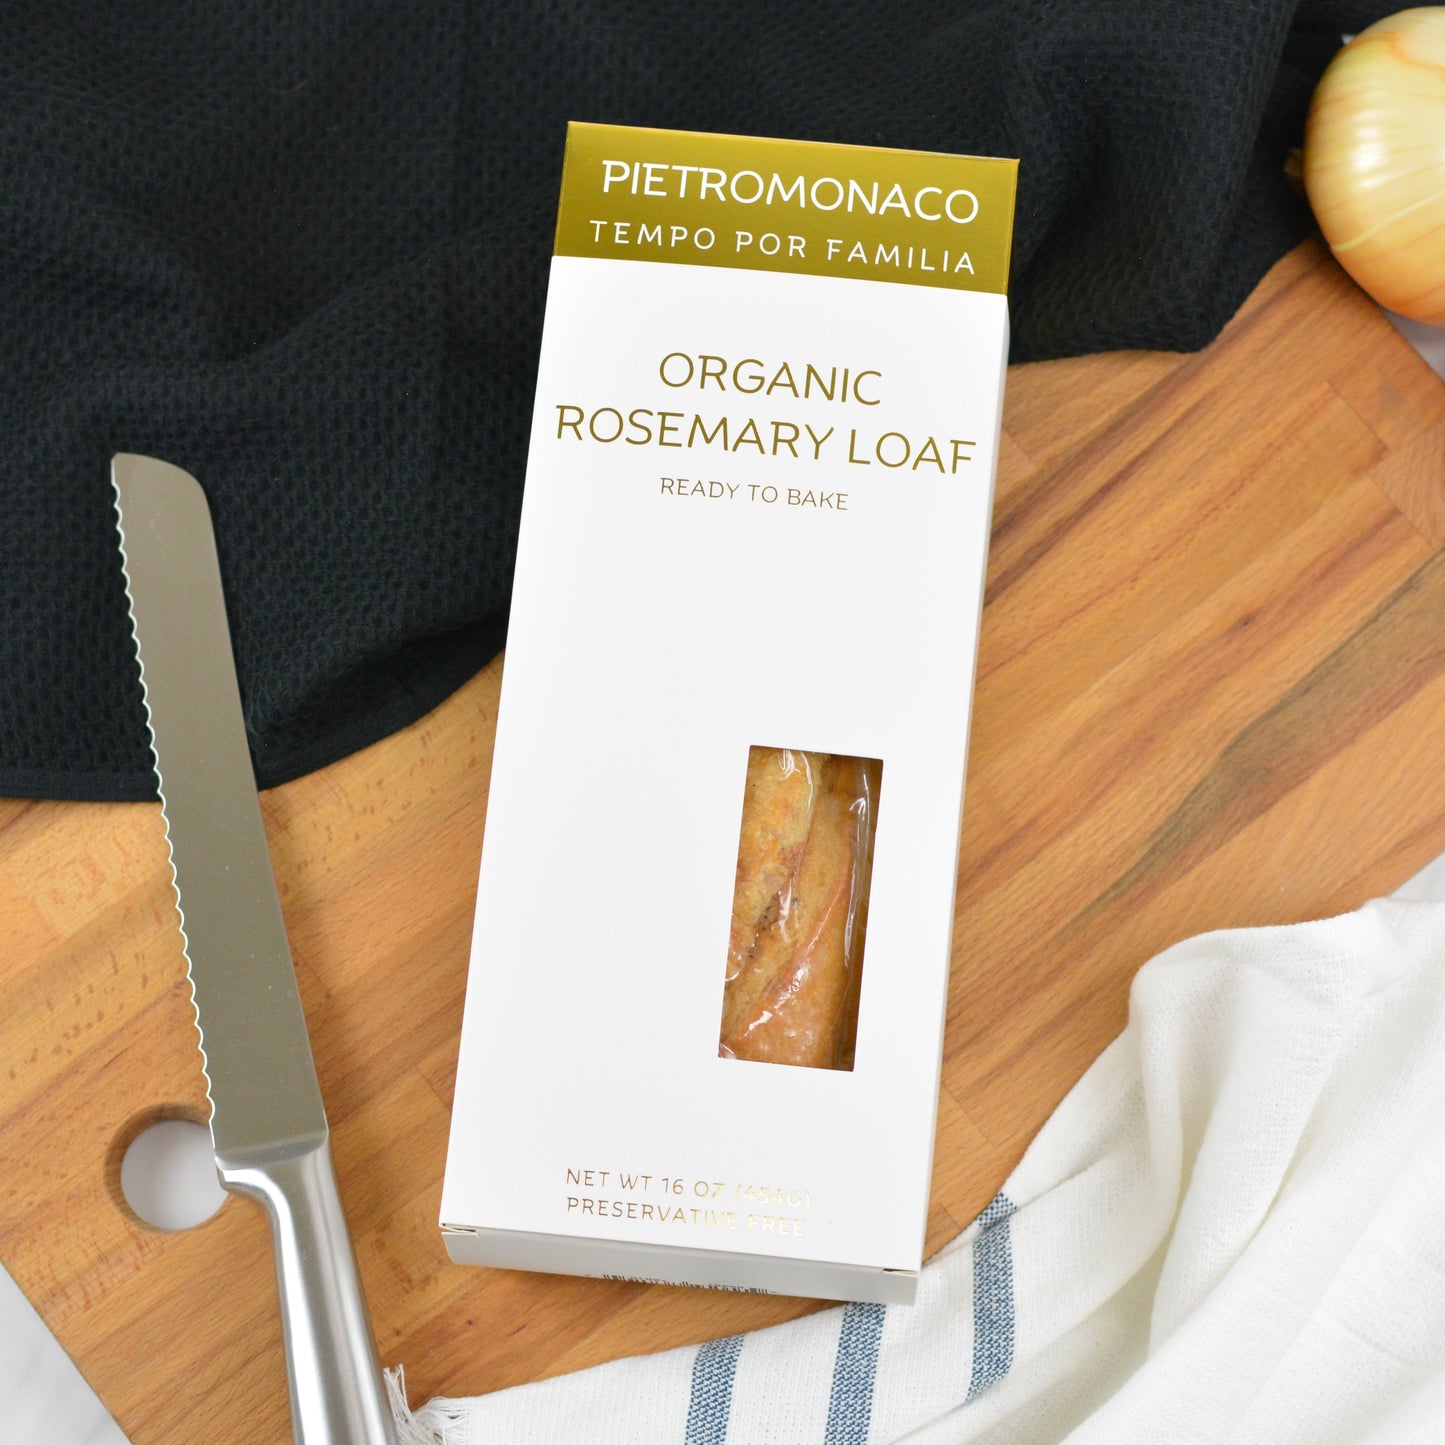 Private Label Packaging Only for Organic Take & Bake Rosemary Loaf-500